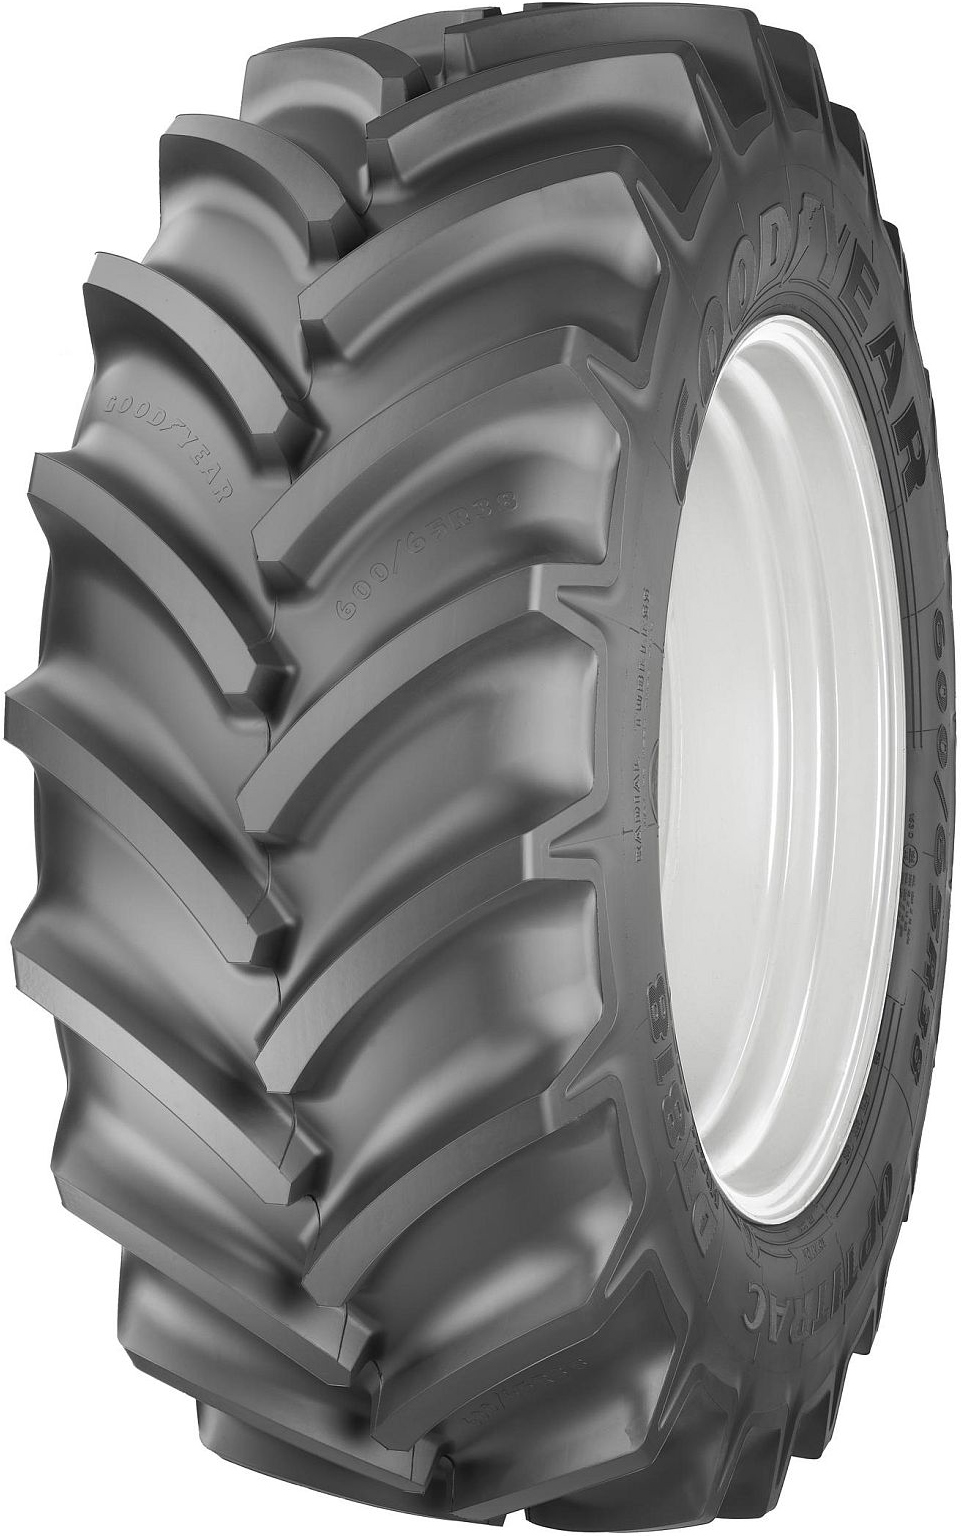 product_type-industrial_tires GOODYEAR Optitrac DT 818 HS TL 440/65 R28 134D